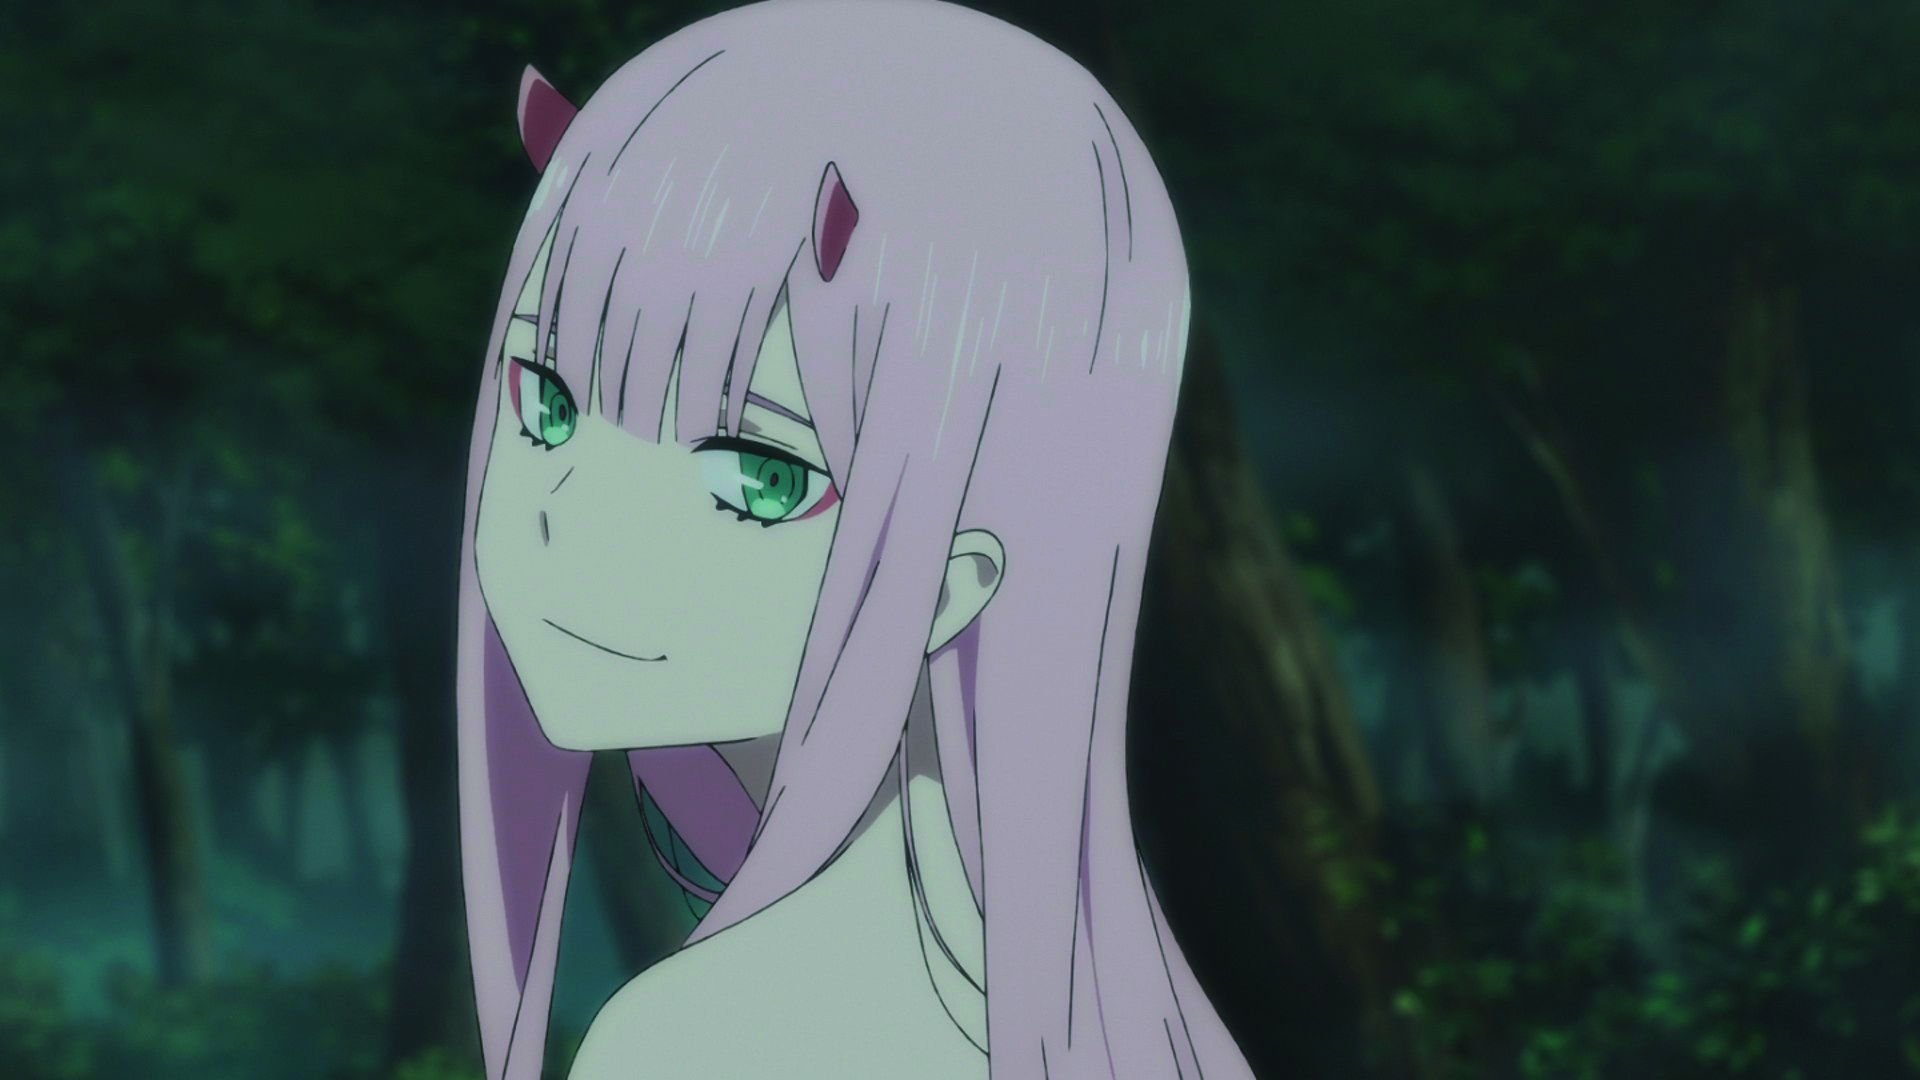 Anime Review: DARLING in the FRANXX Episode 1 - Sequential Planet